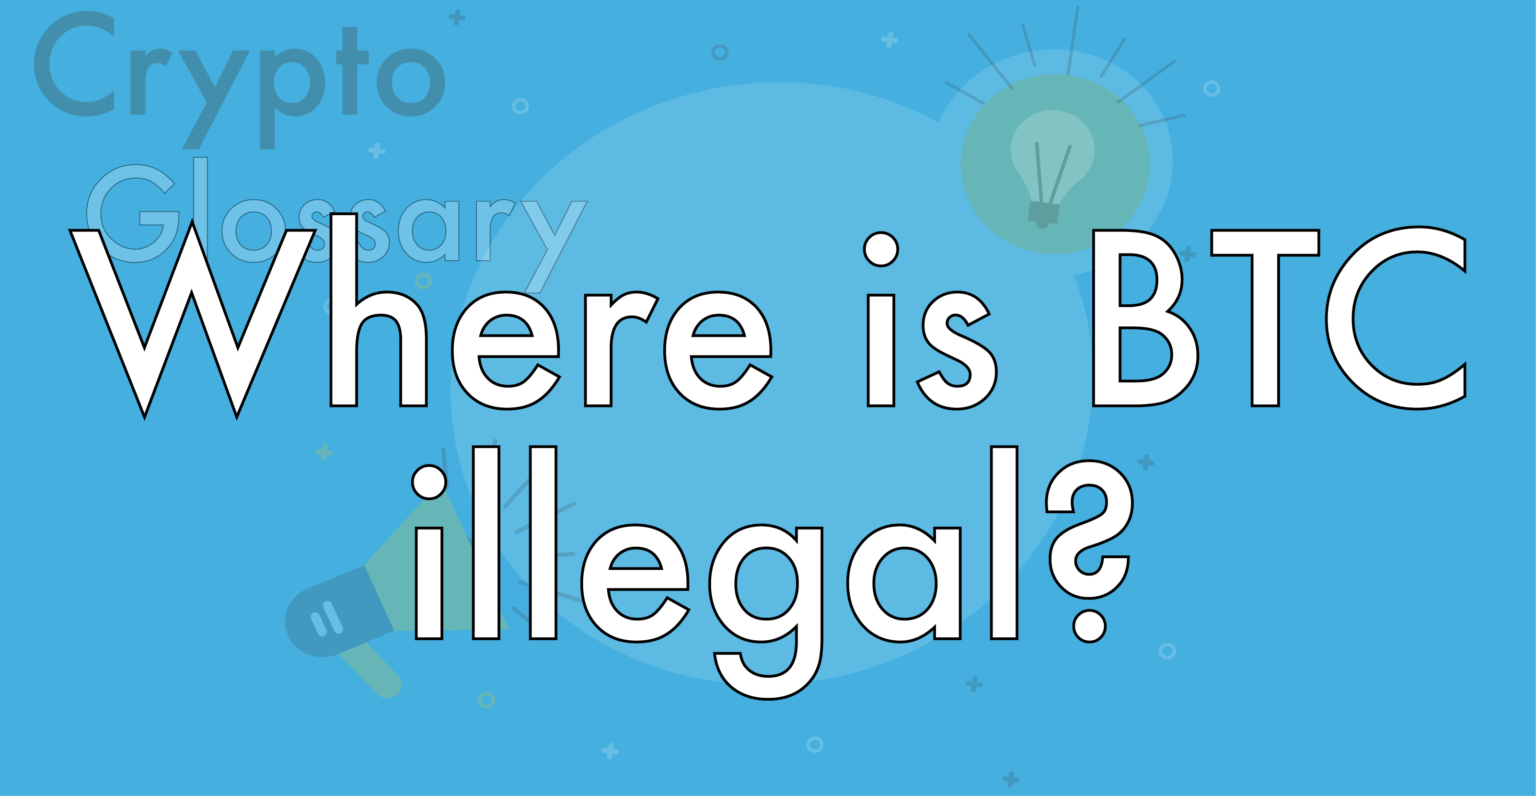 is buying and selling bitcoins illegal immigrant